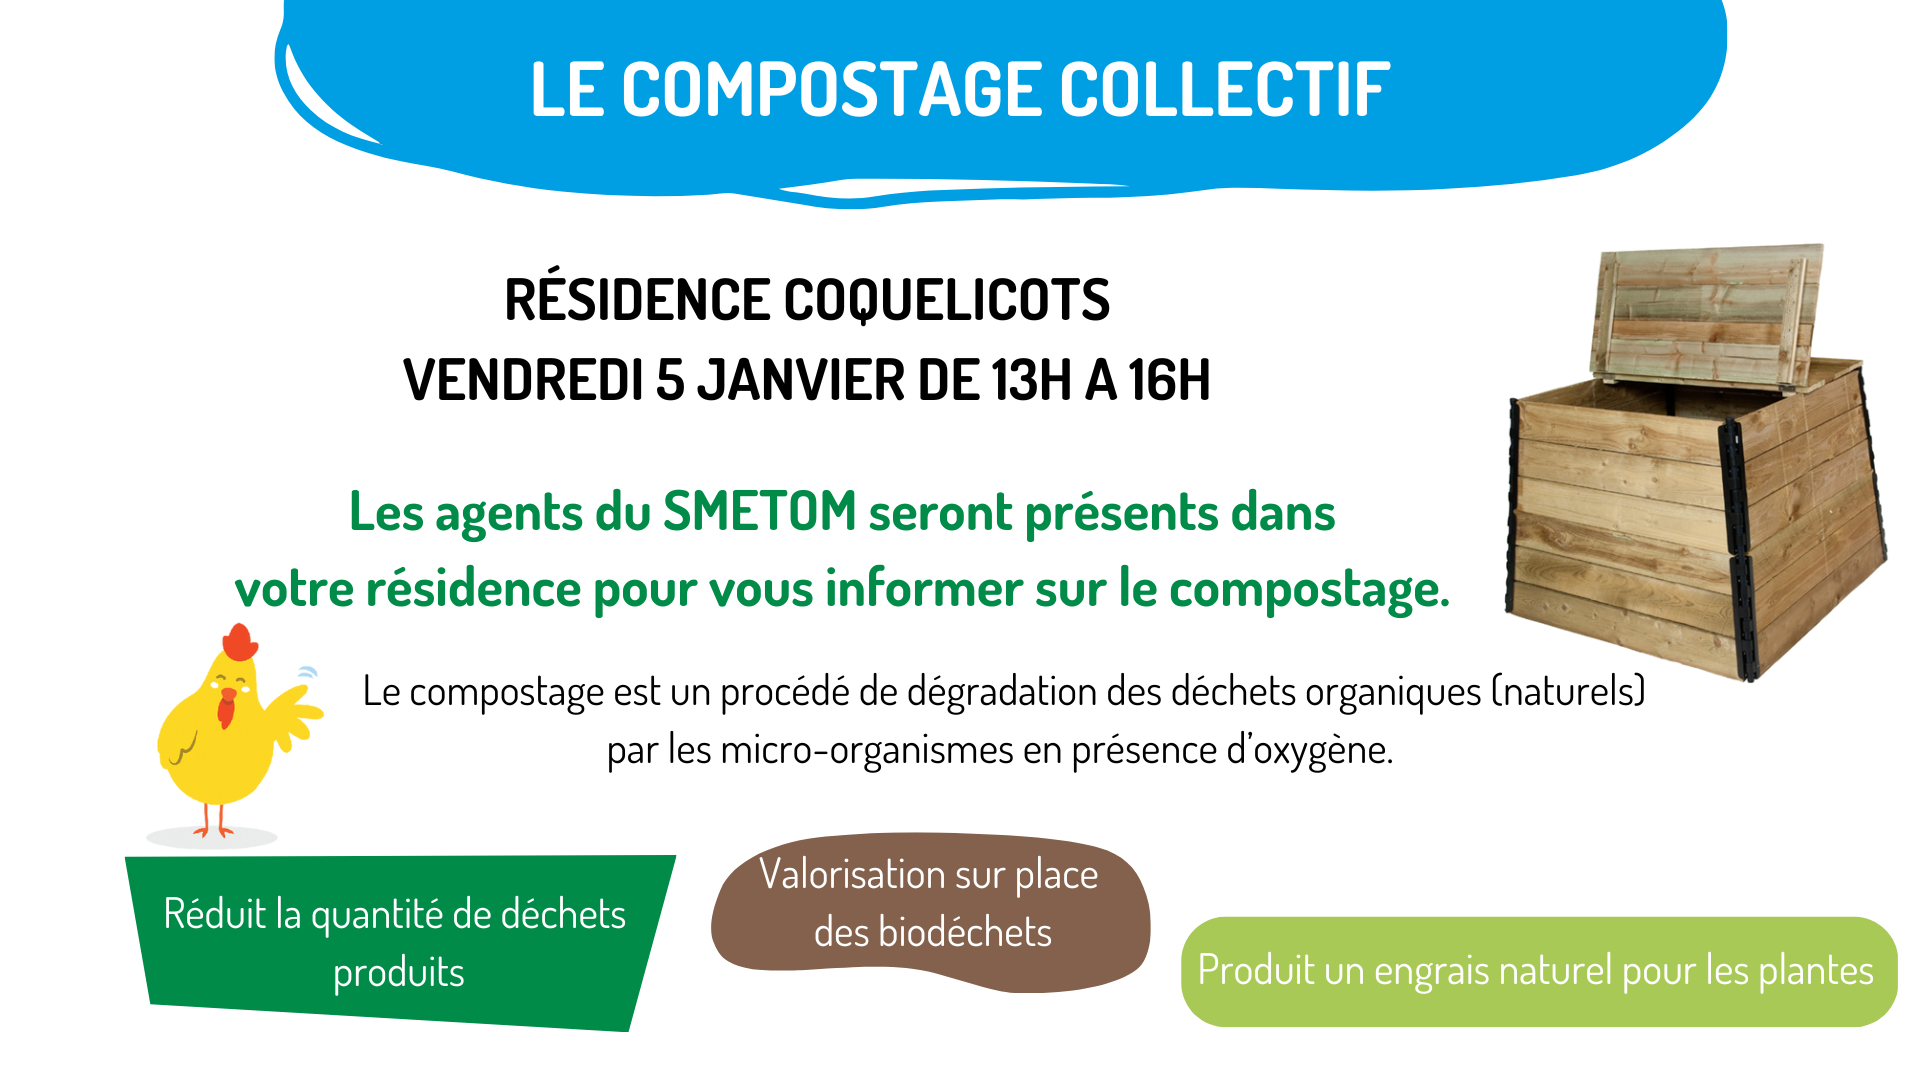 COMPOSTAGE COLLECTIF